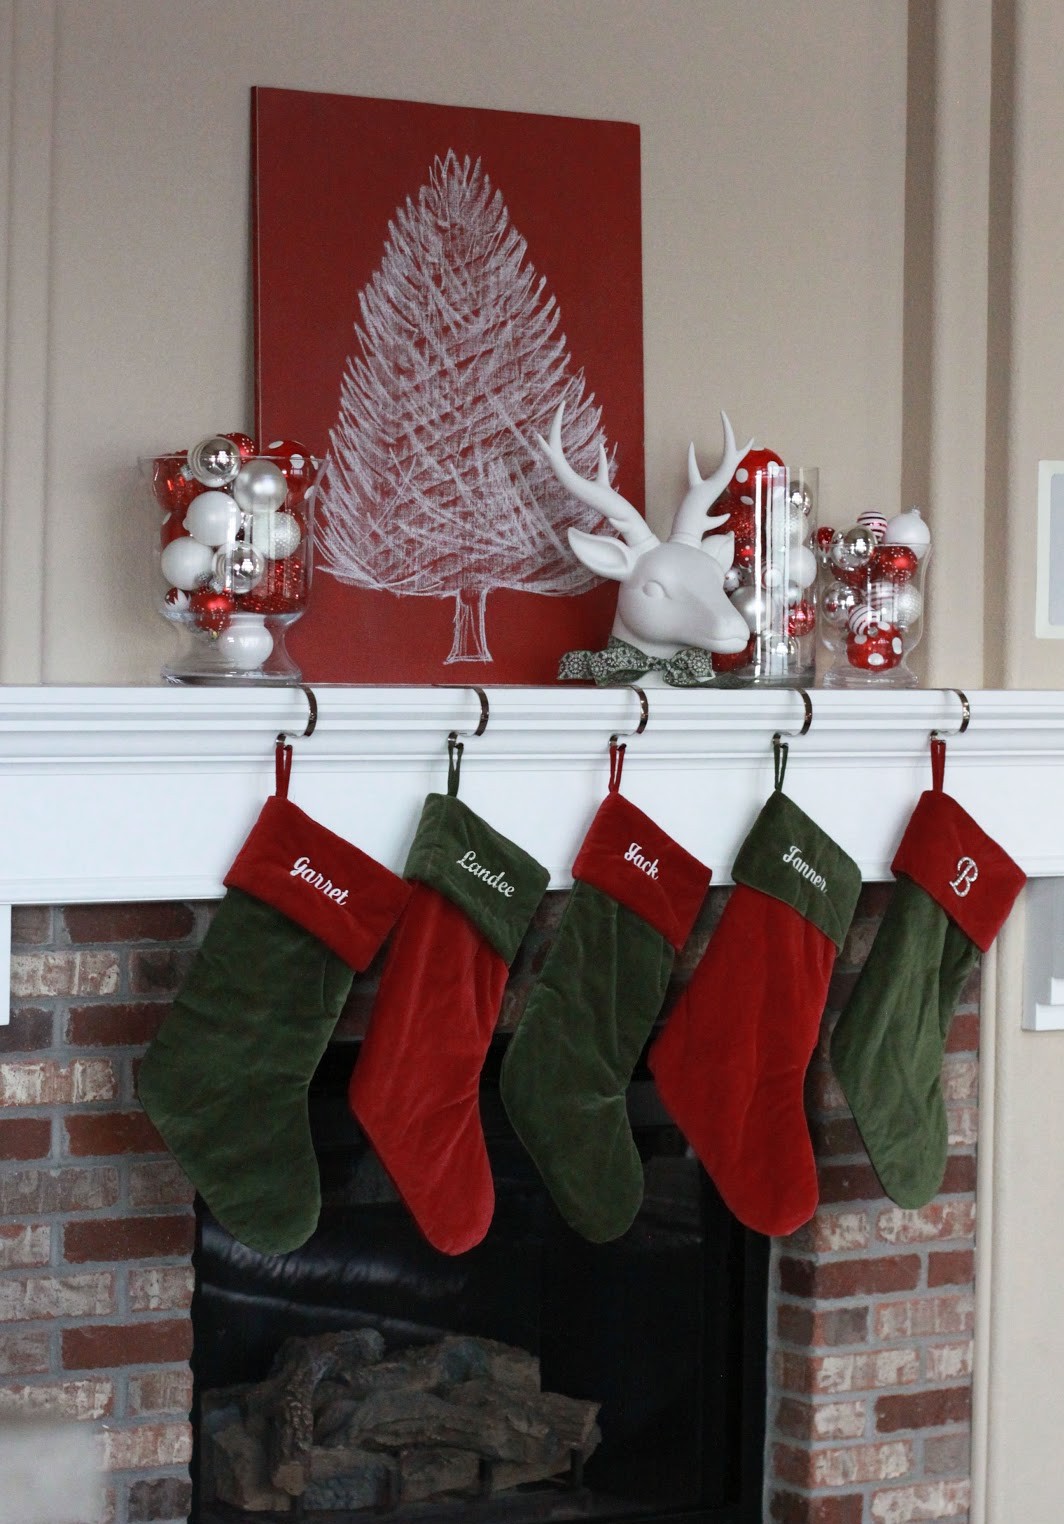 20 Christmas Mantel Decorations Ideas for This Year